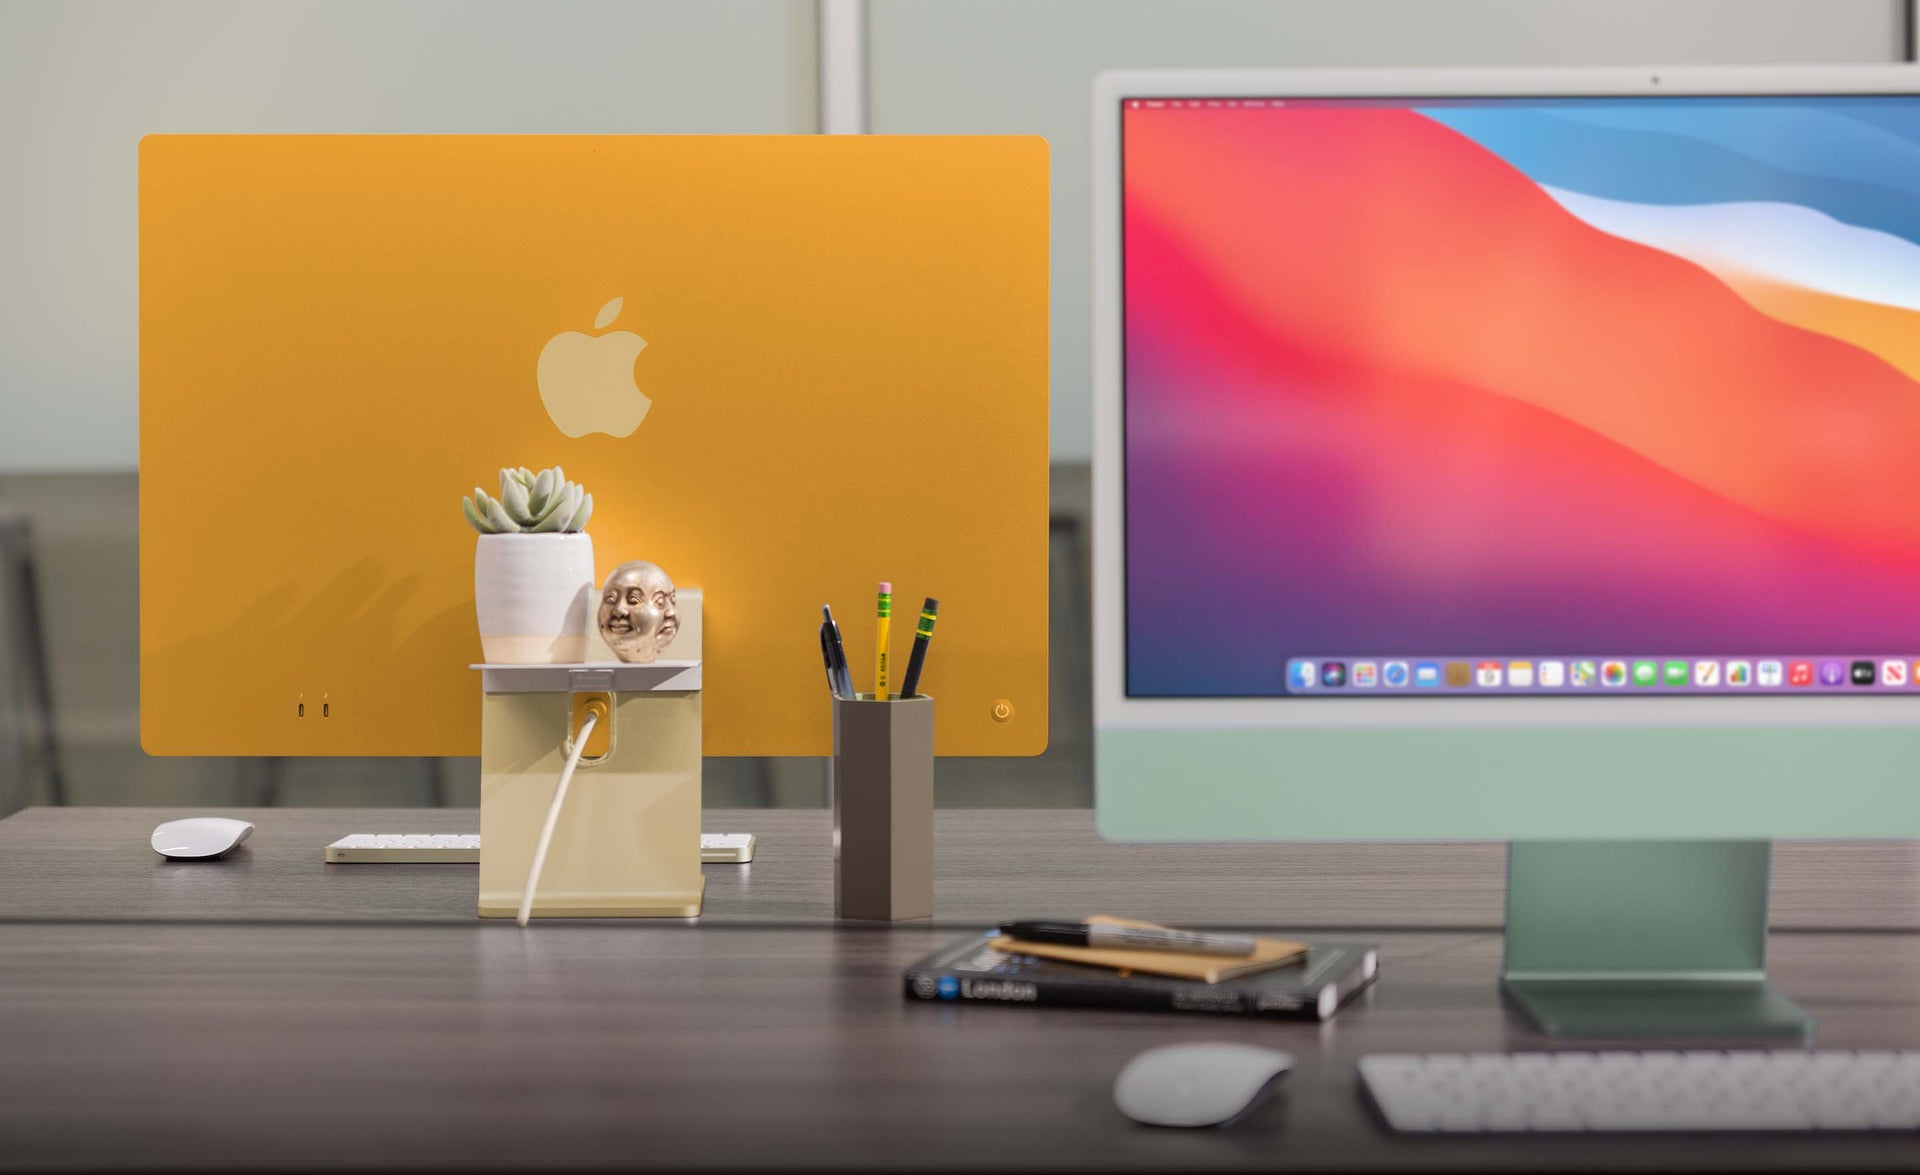 A promotional image from Twelve South showcasing its BackPack matte white aluminum shelf attached to the back of an orange 24-inch M1 iMac